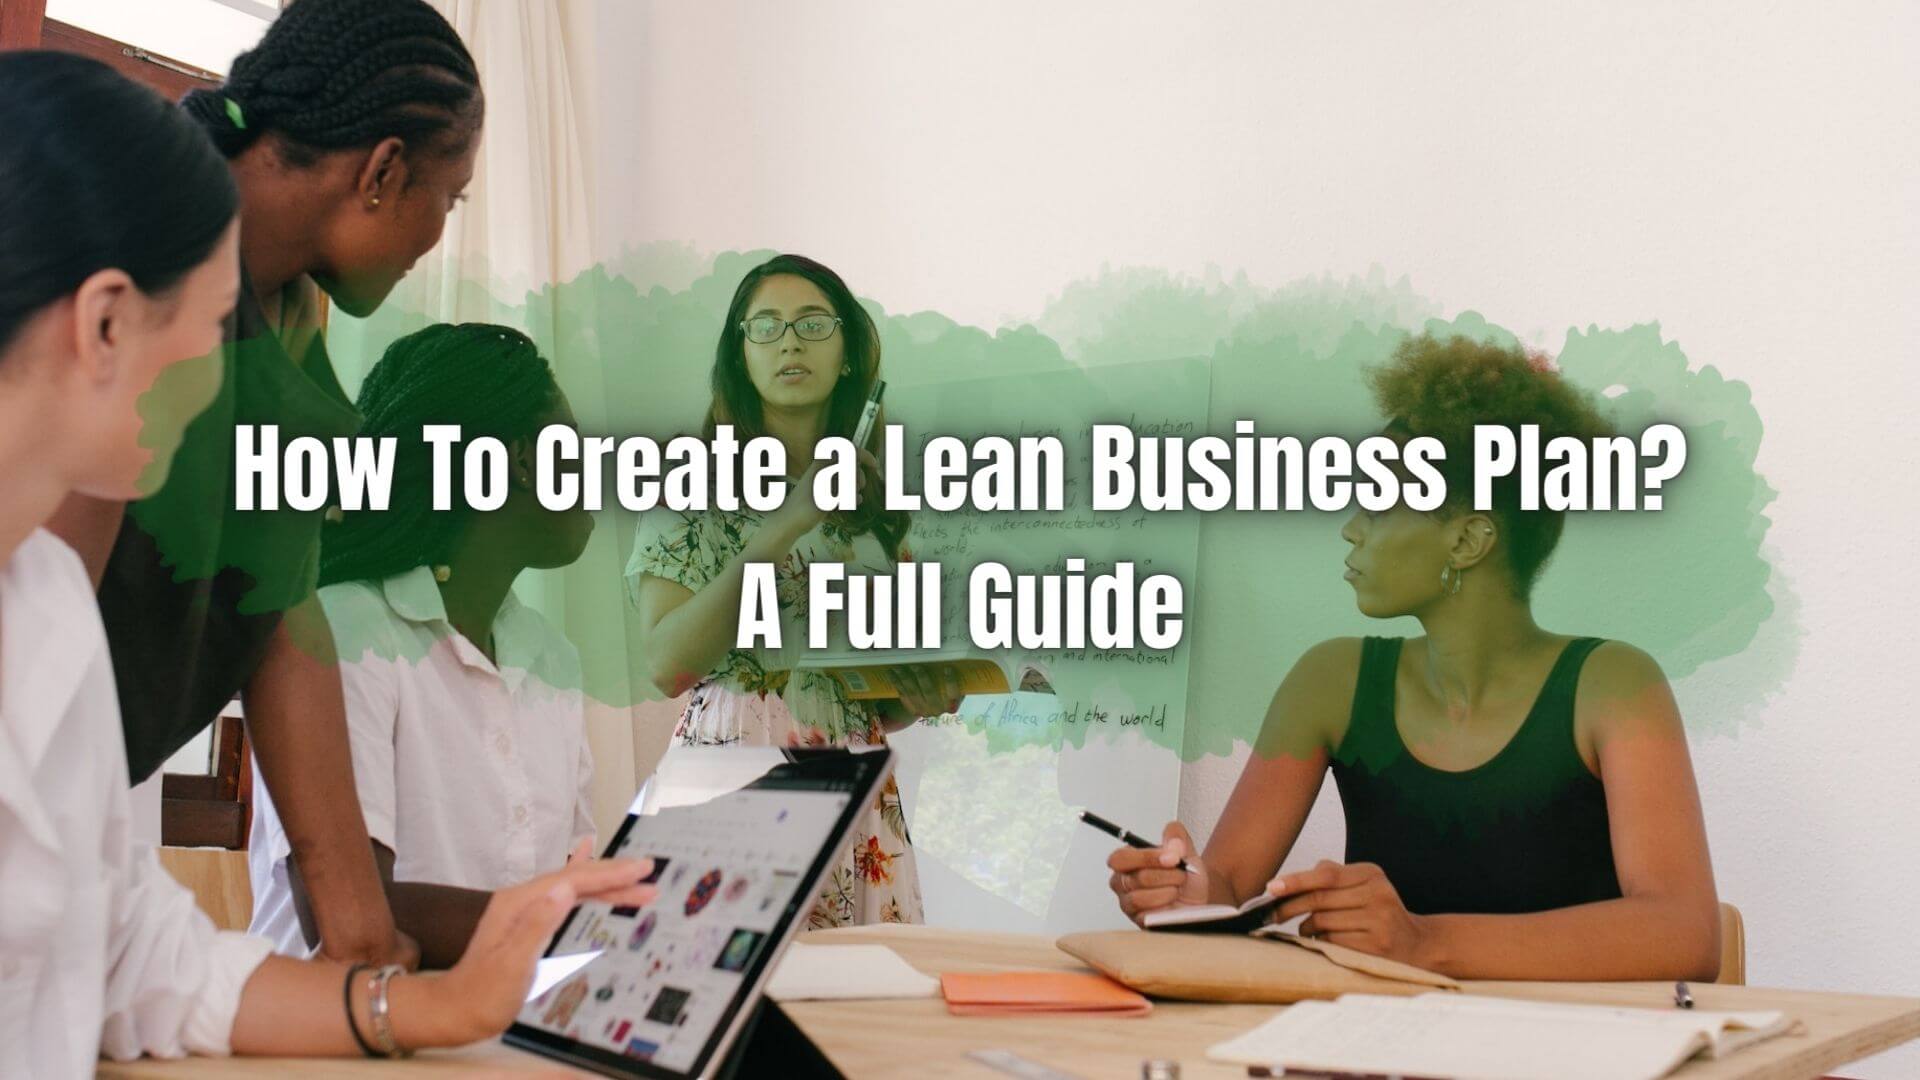 Creating a lean business plan helps businesses focus on their goals, target market, and strategies for success. Click here to learn how!